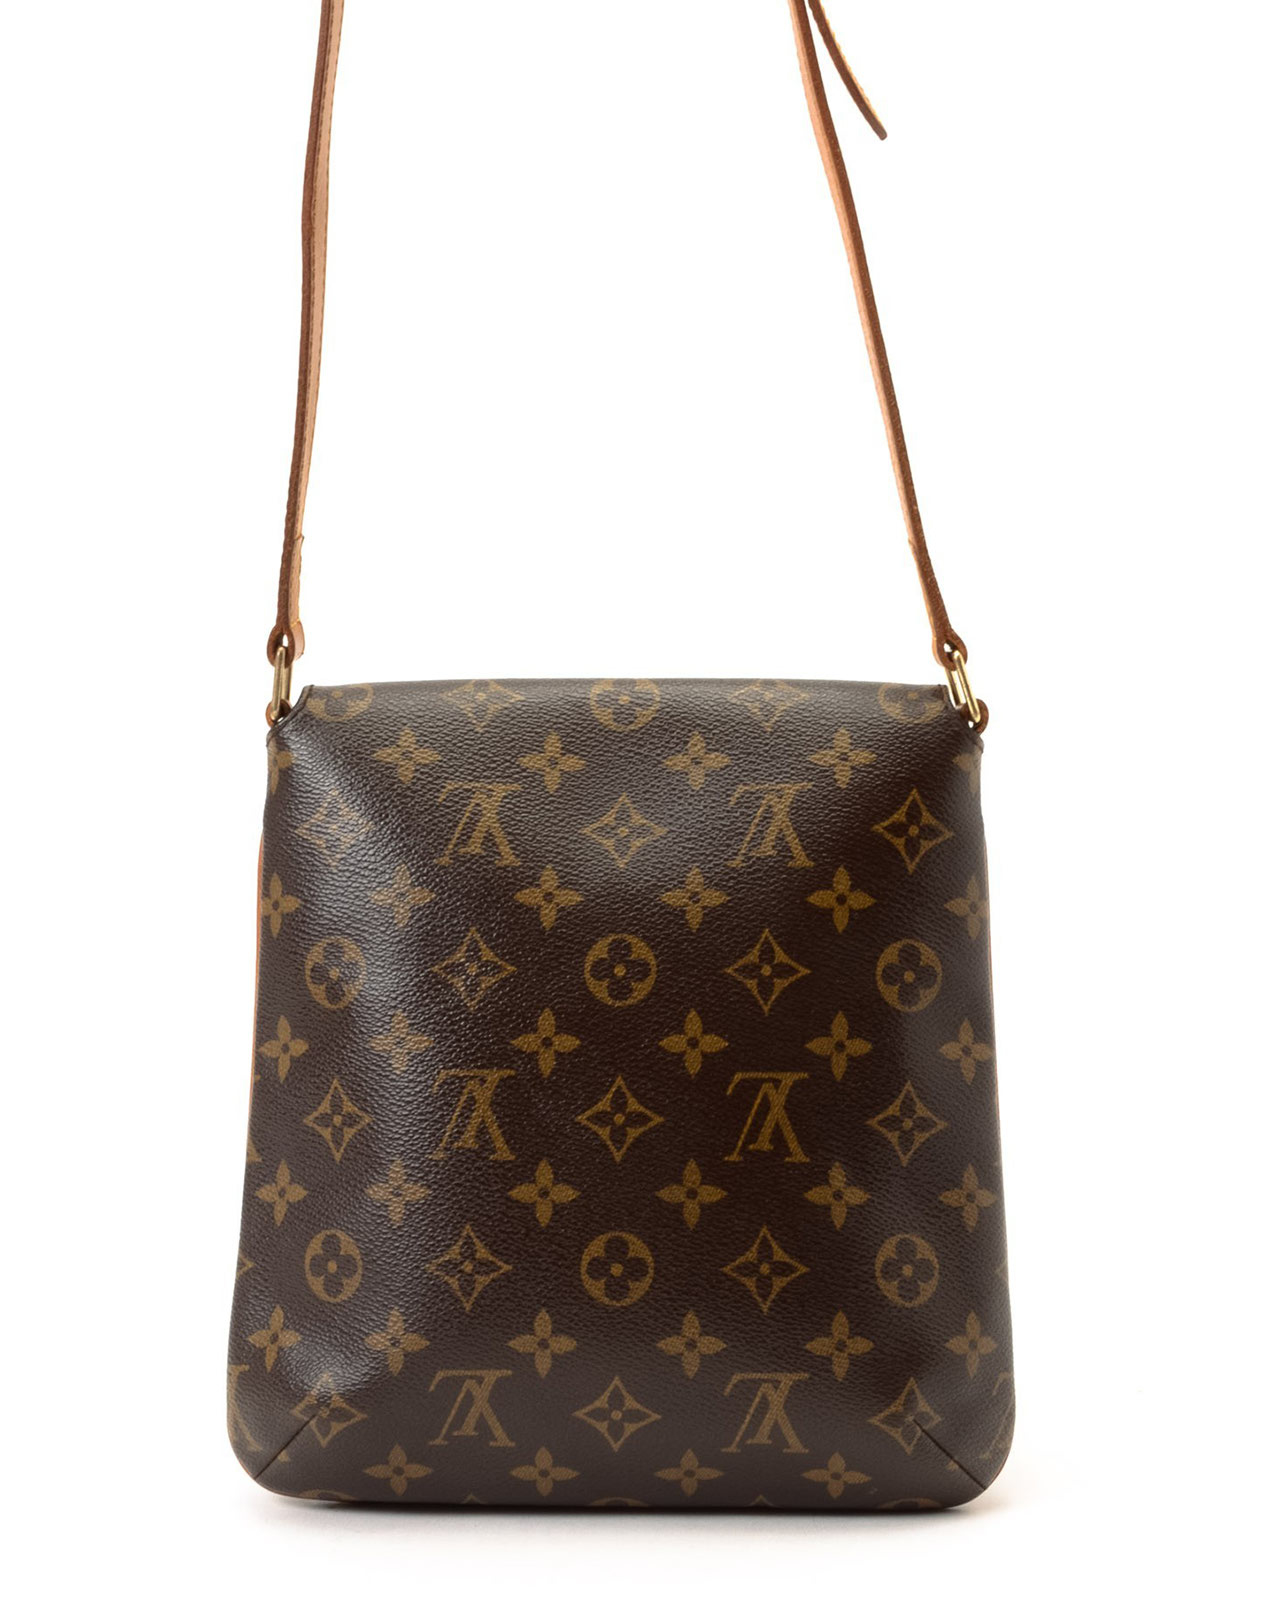 Louis Vuitton Factory Outlet Chicago | Confederated Tribes of the Umatilla Indian Reservation